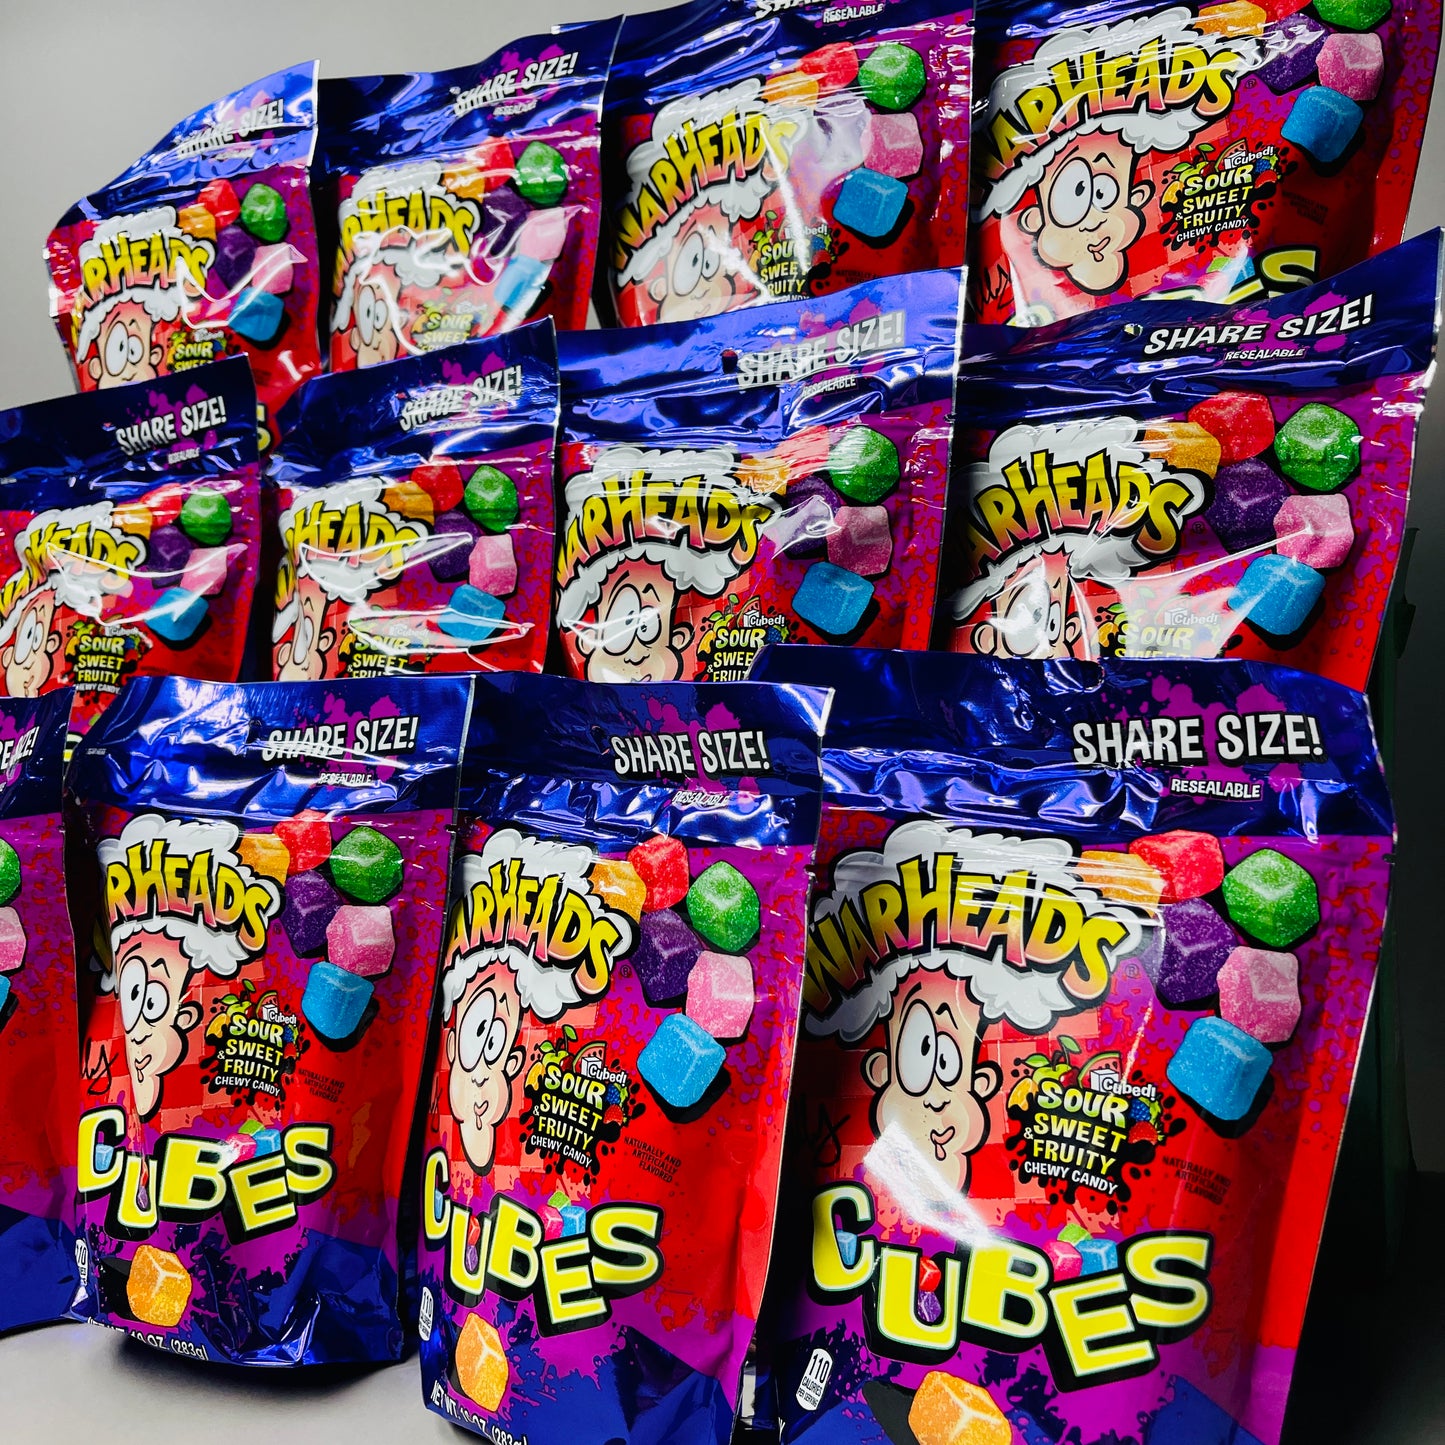 ZA@ WARHEADS Cubes 12-PACK Sour, Sweet, & Fruity Chewy Candy 10 oz 10/23 (New)